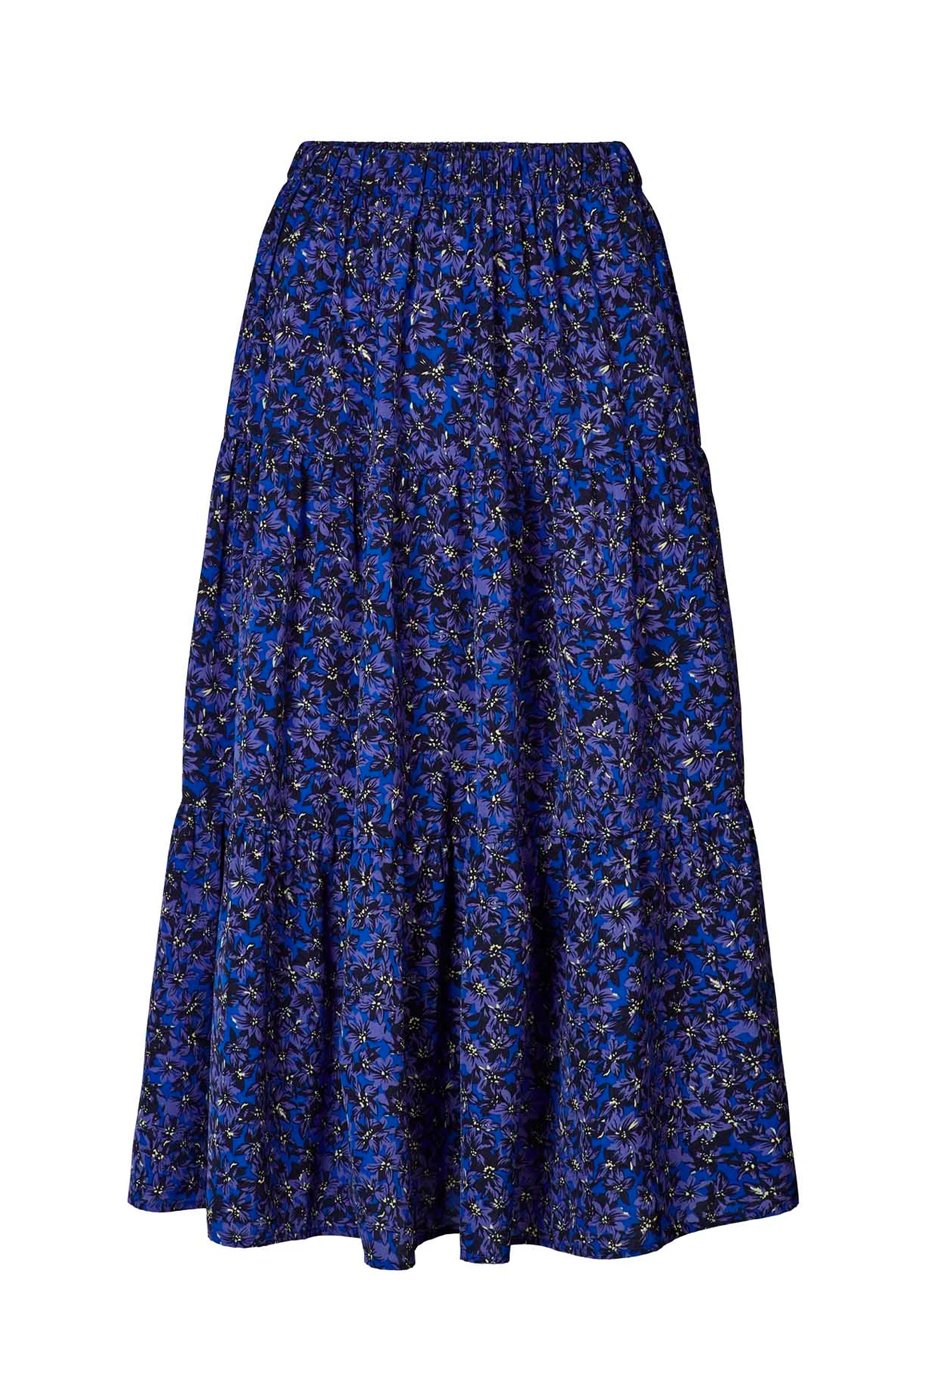 Morning Skirt Blue Laundry - Product Sienna Goodies